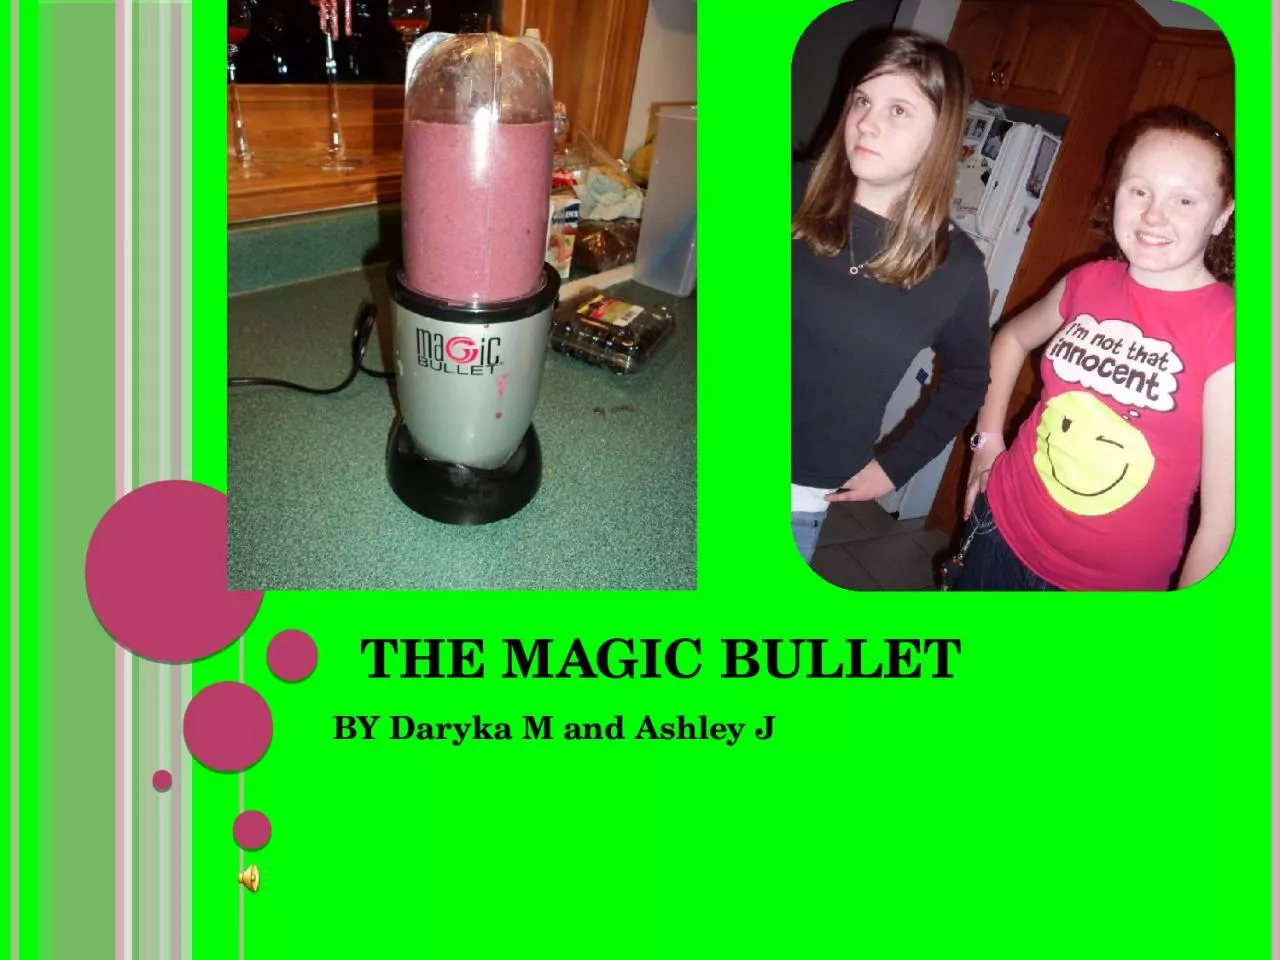 The Magic bullet BY Daryka M and Ashley J